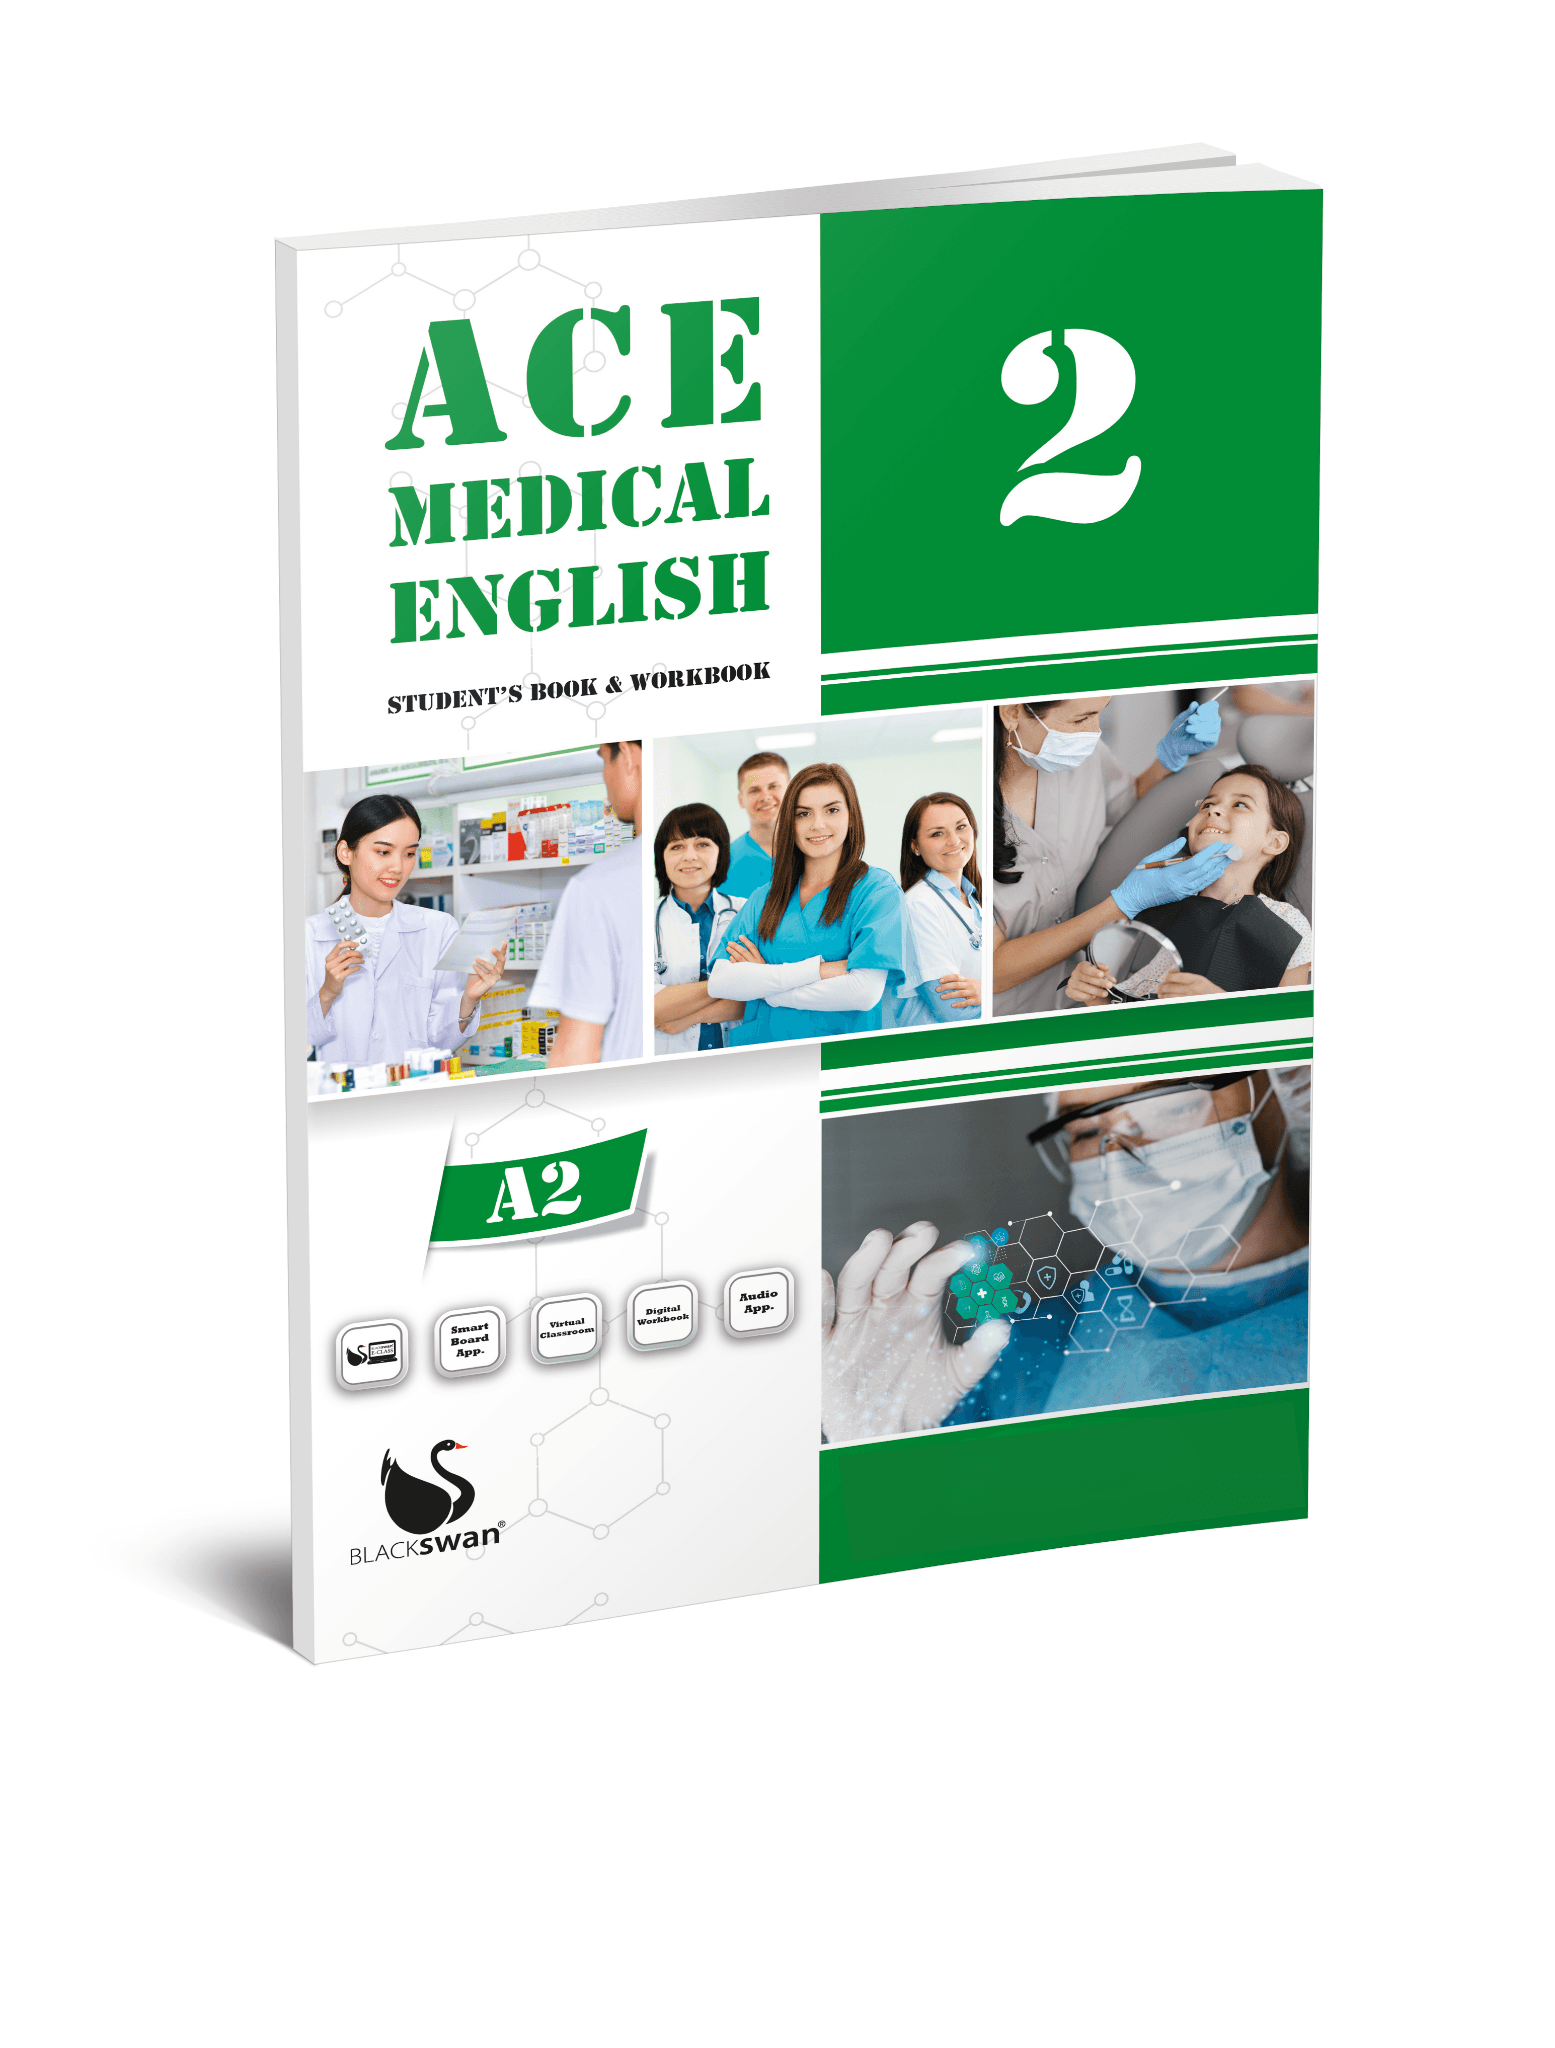 ACE Medical English 2 Student's Book & Workbook